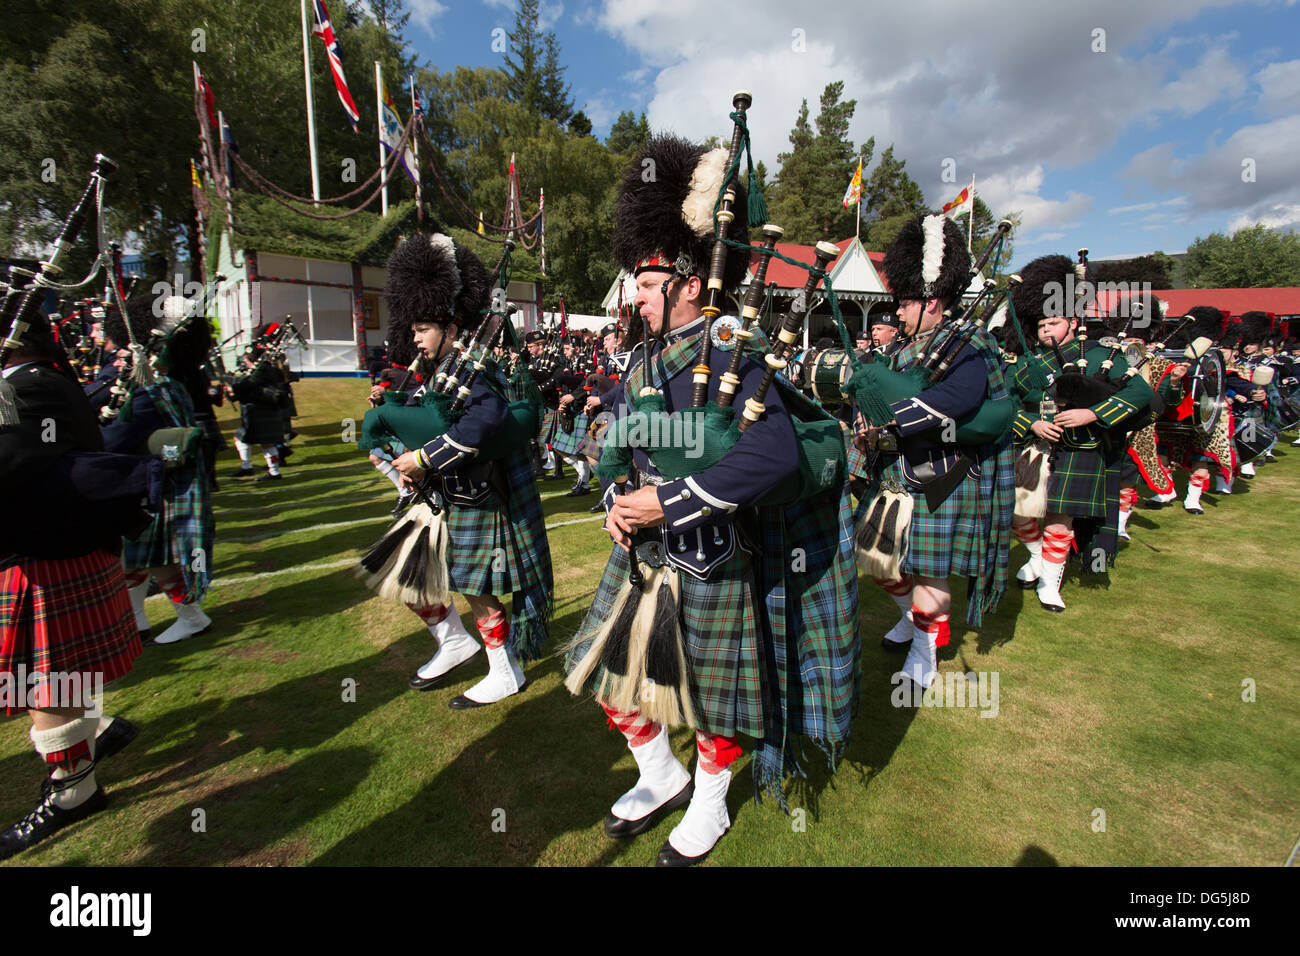 Village of Braemar, Scotland. The massed pipe bands marching at the Royal Braemar Gathering games. Stock Photo